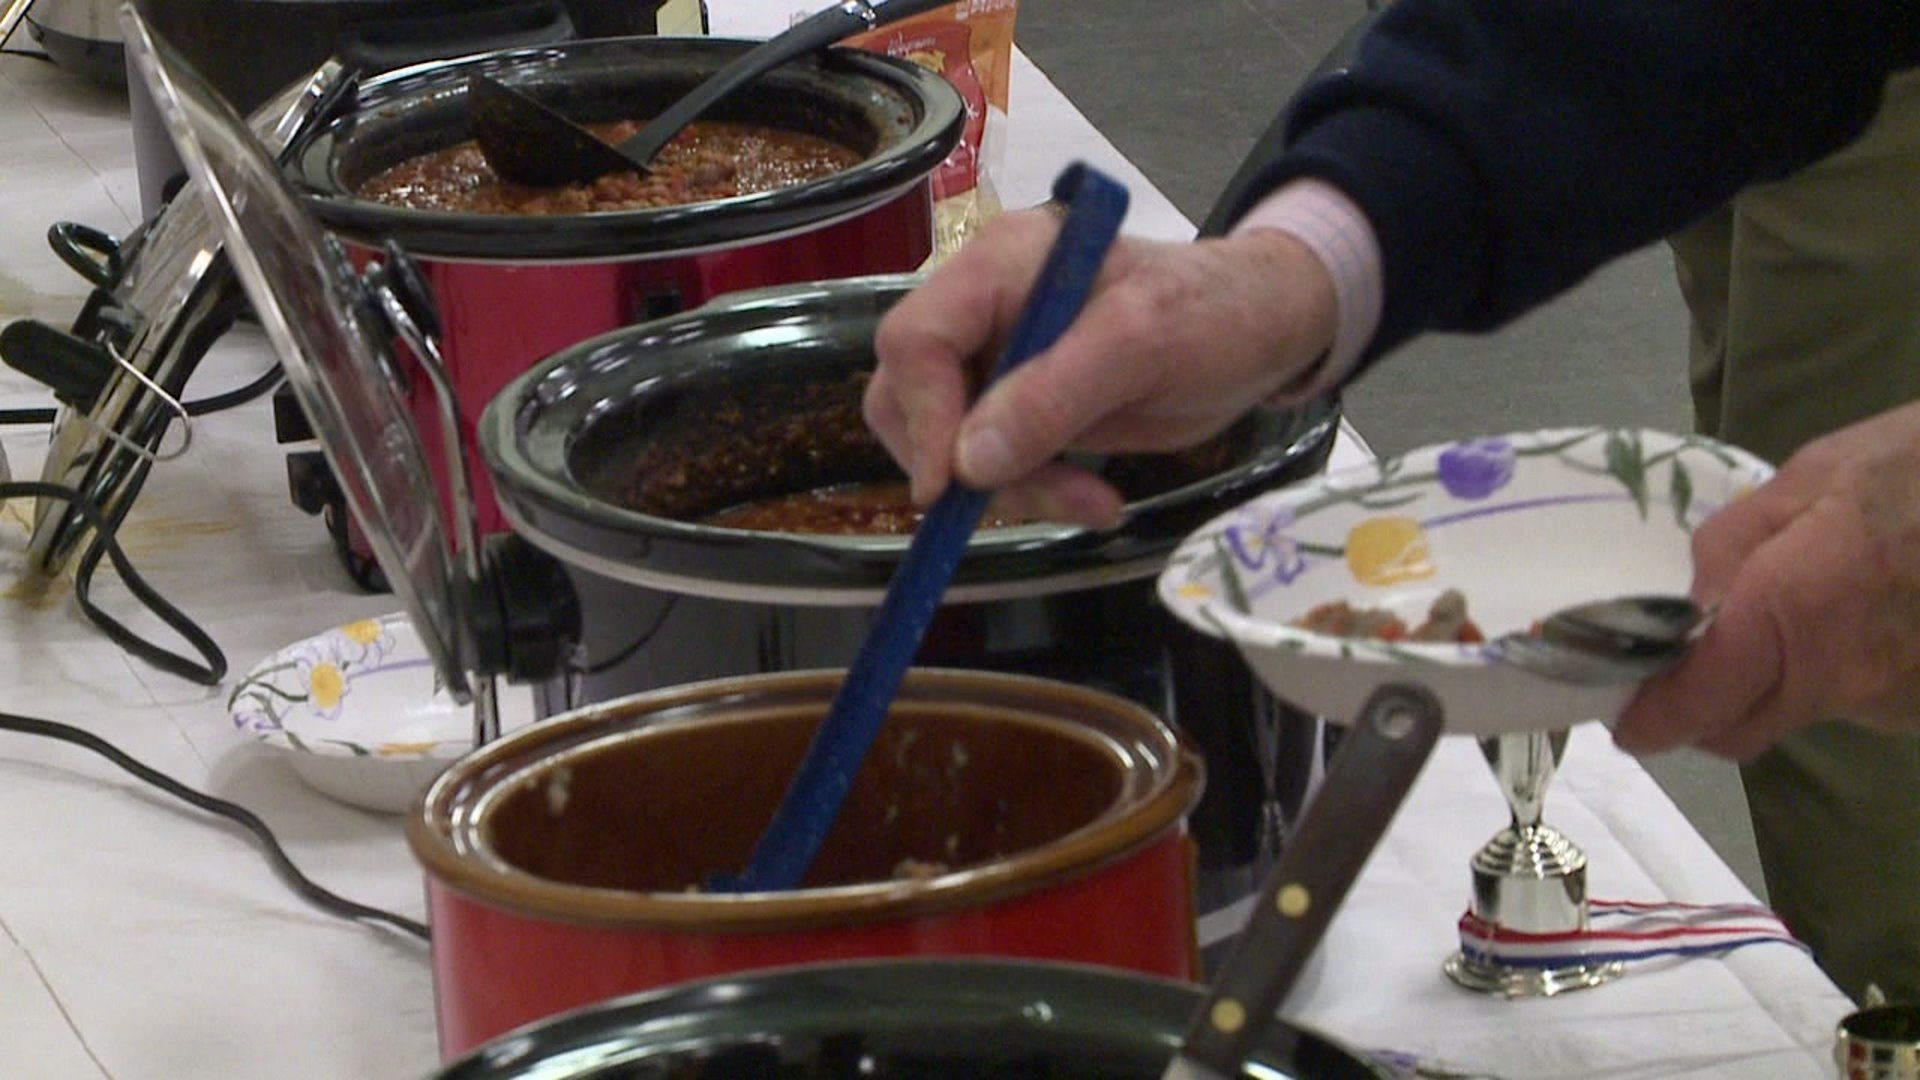 Chili Cook-off Helps Those in Need